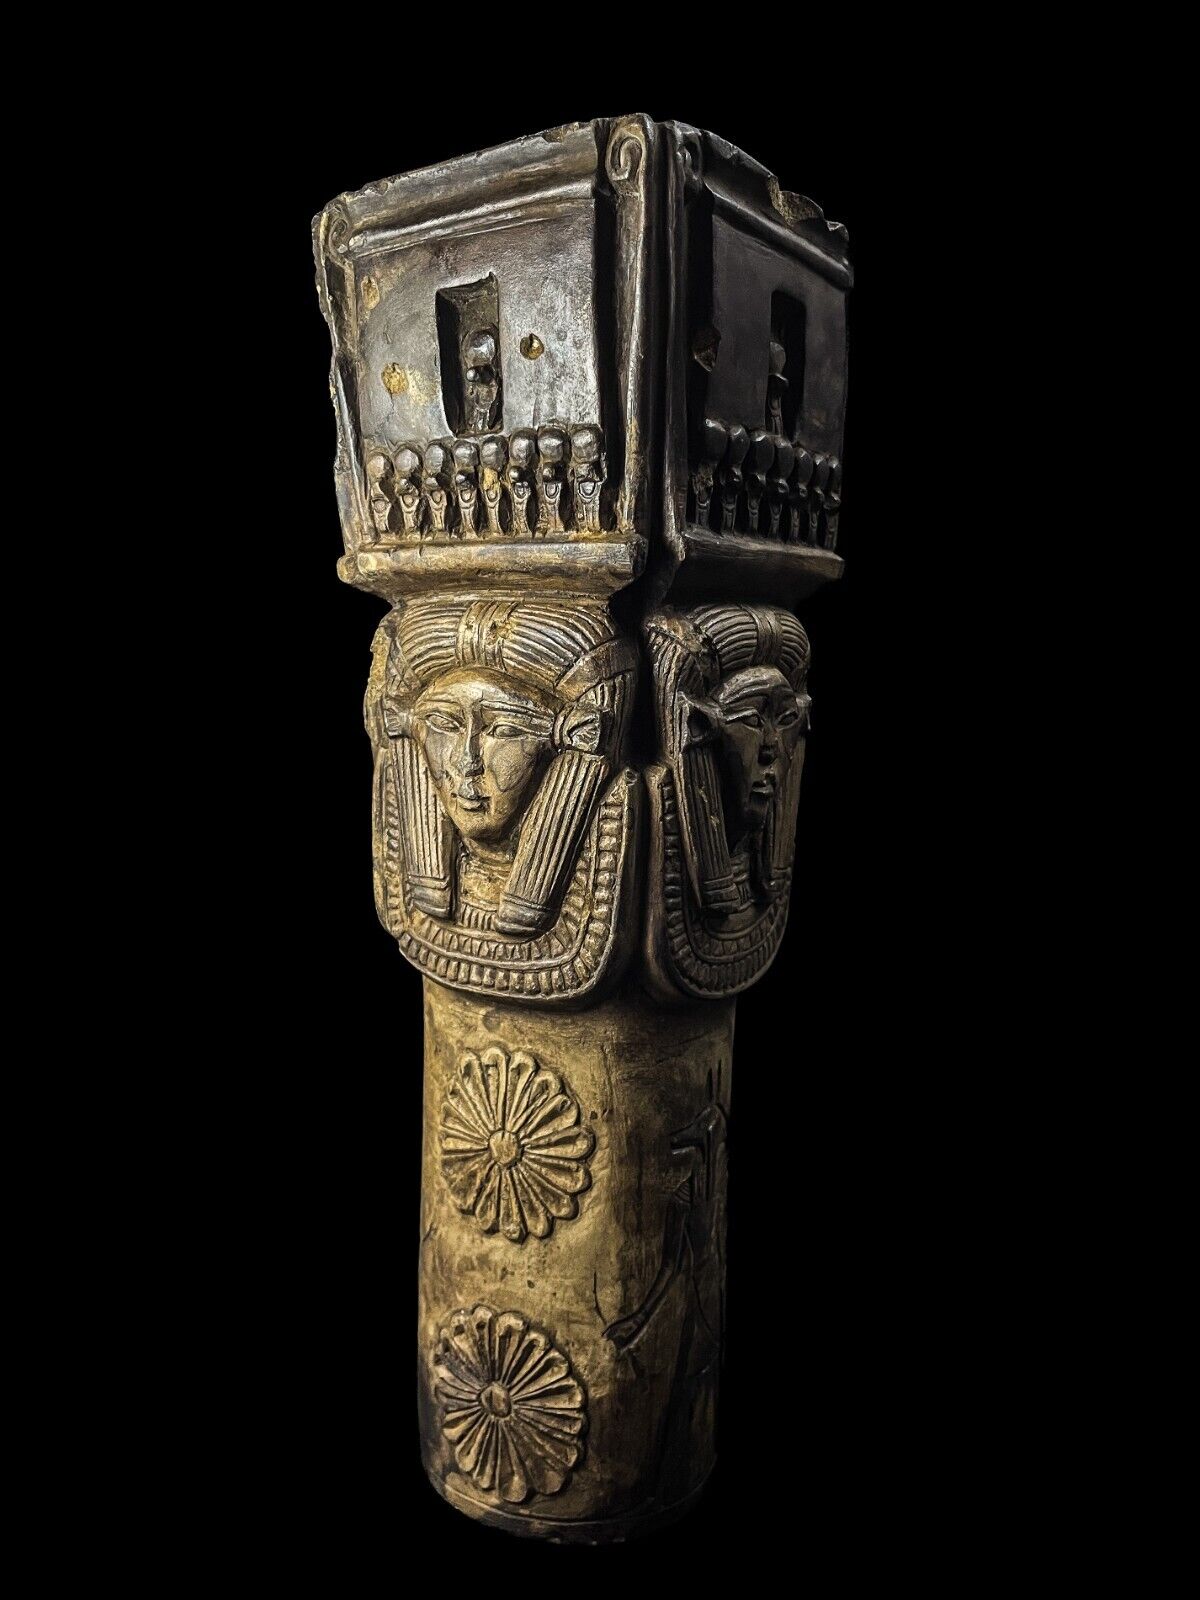 Replica Egyptian Artifact for Hathor Column with Anubis and Horus Engraved on it